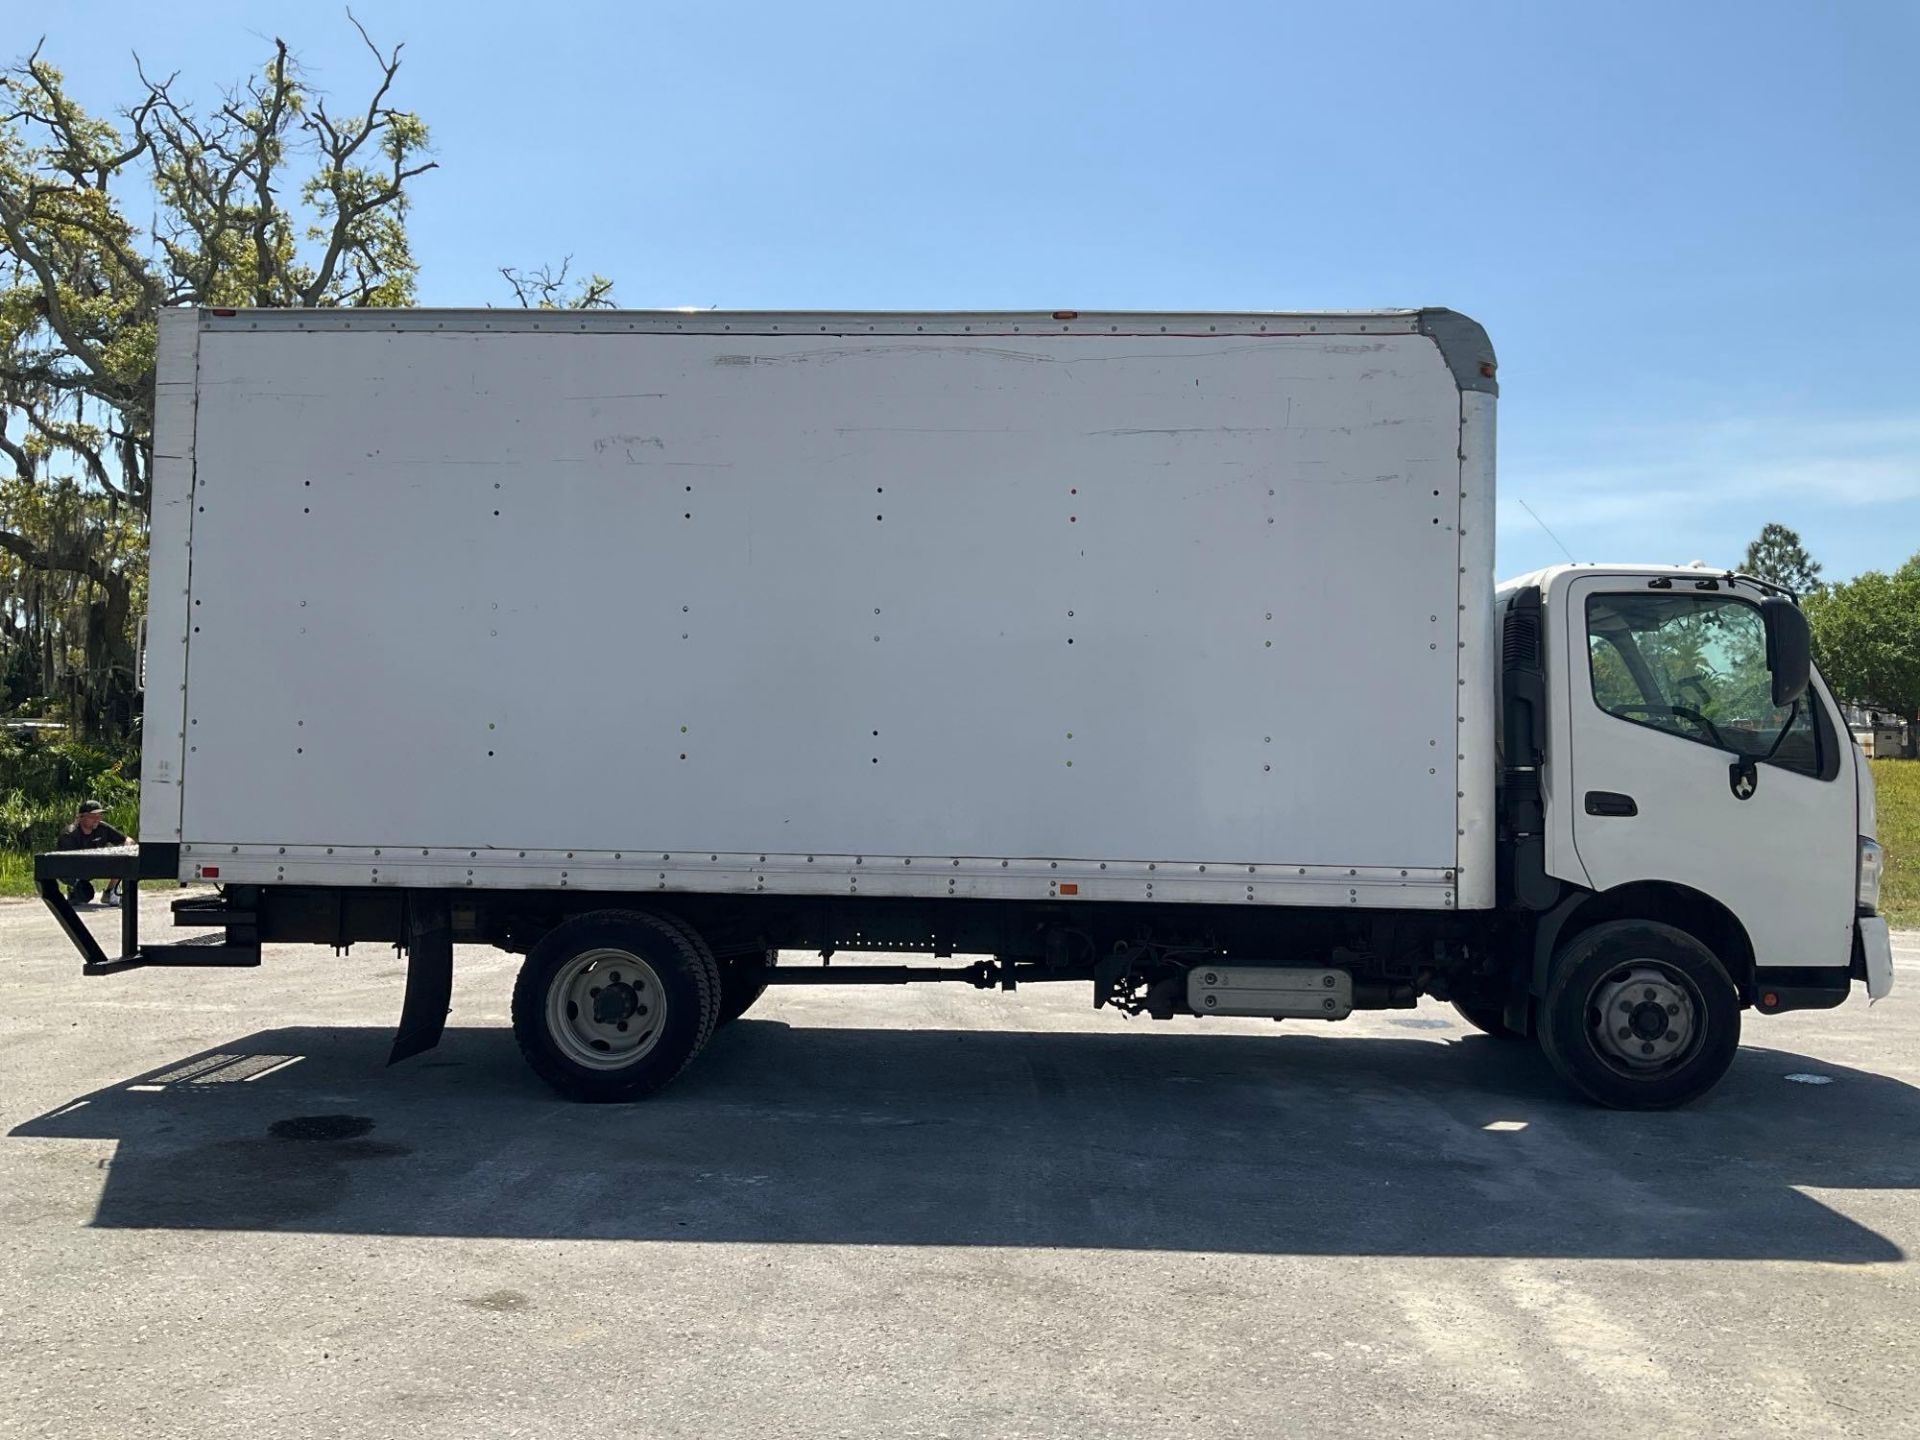 2017 HINO 740 BOX TRUCK , DIESEL , APPROX GVWR 17,950 LBS, BOX BODY APPROX 18FT, ETRACKS, BACK UP... - Image 7 of 29